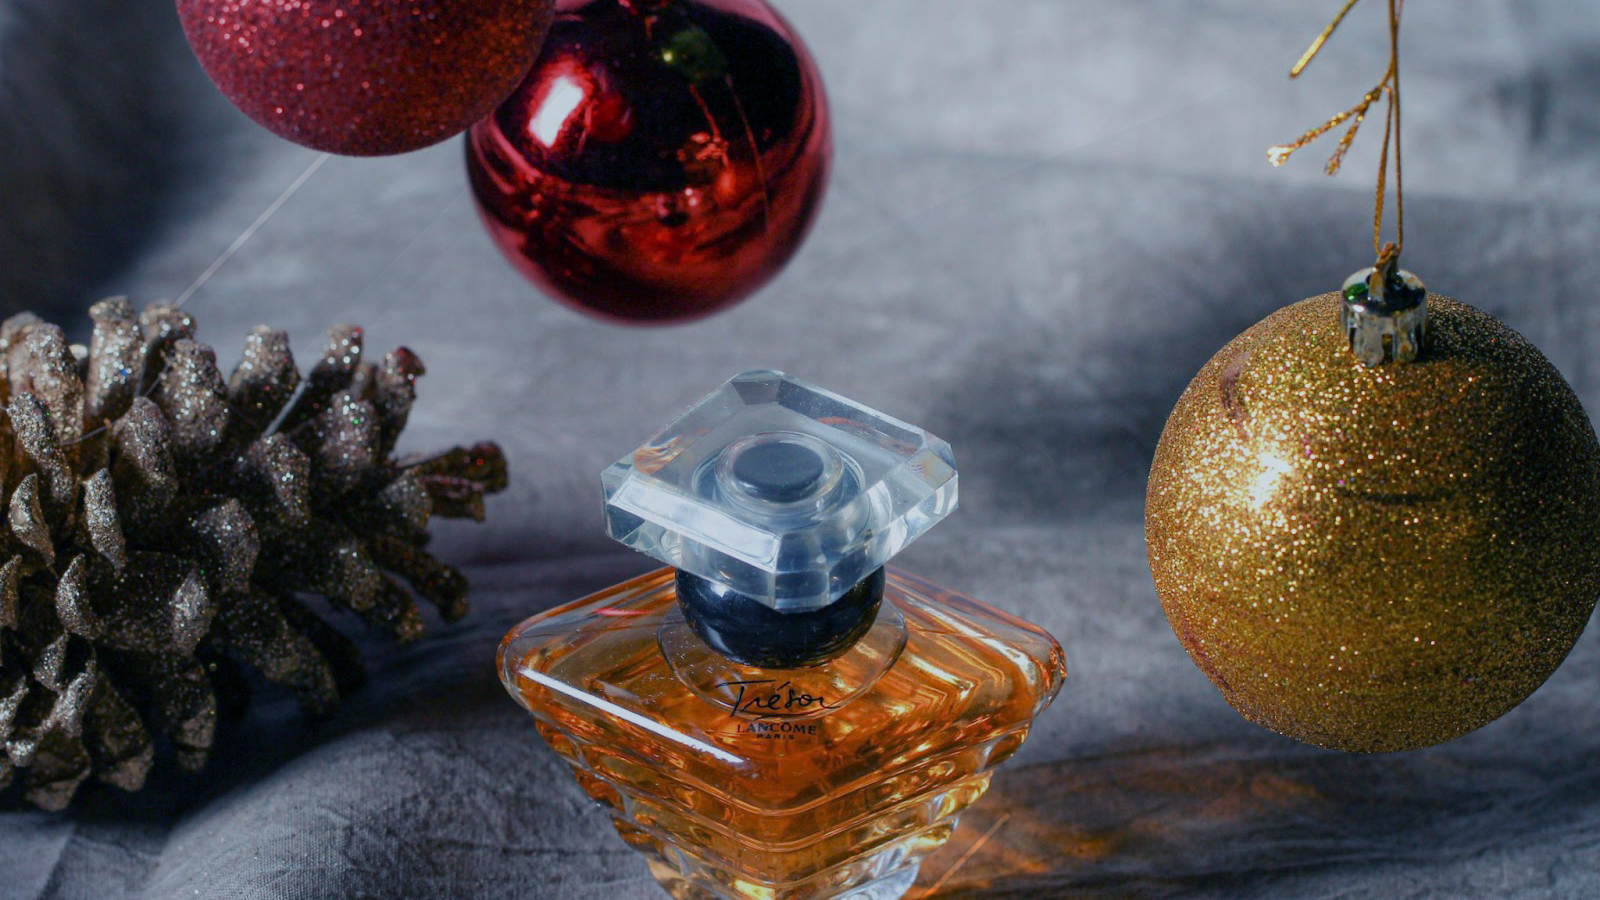 Festive Fragrances And How They're Produced/Extracted